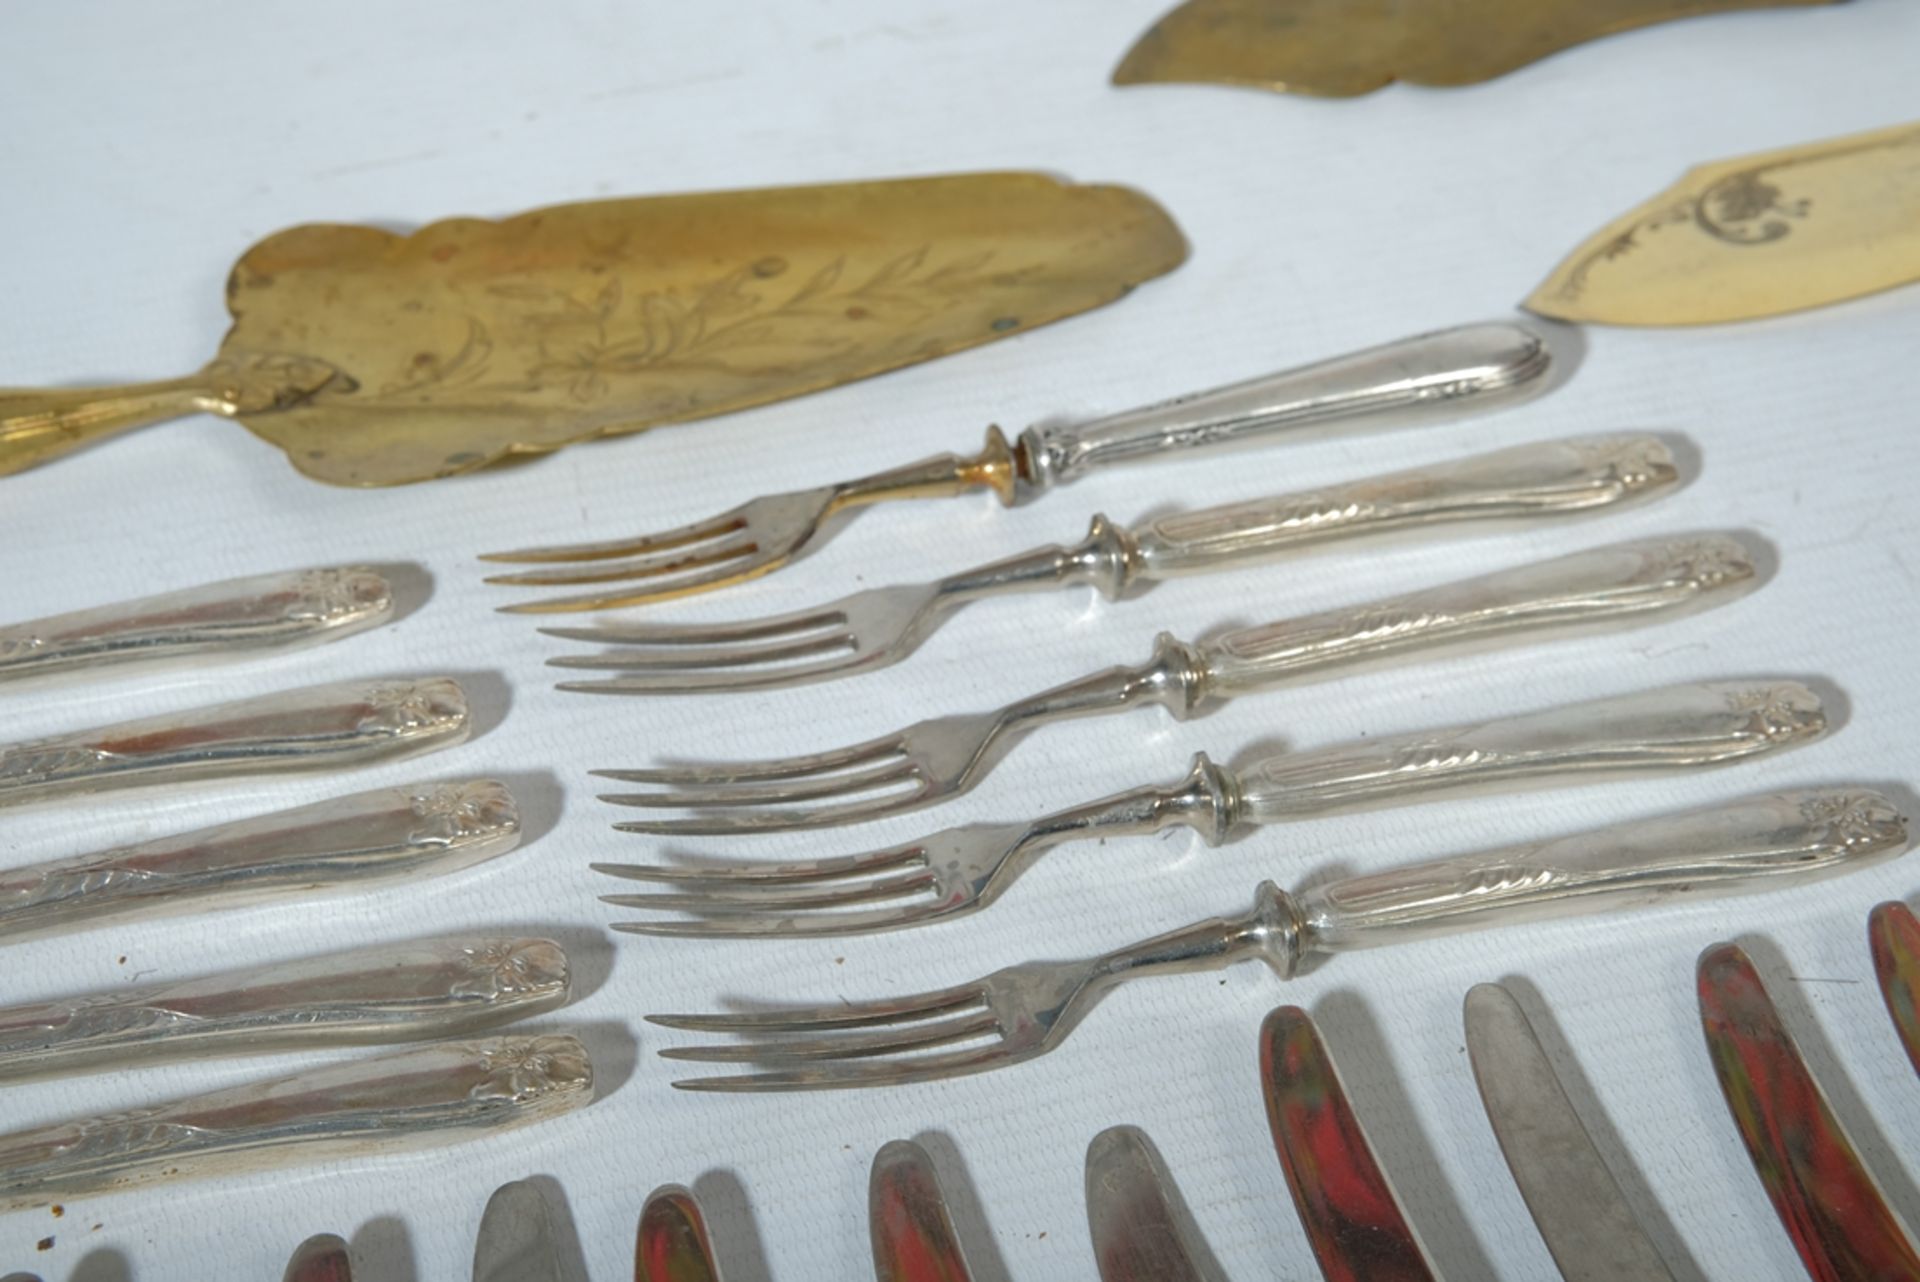 Cutlery set/cake servers for 12 people. Wooden handles made from 800 silver. 